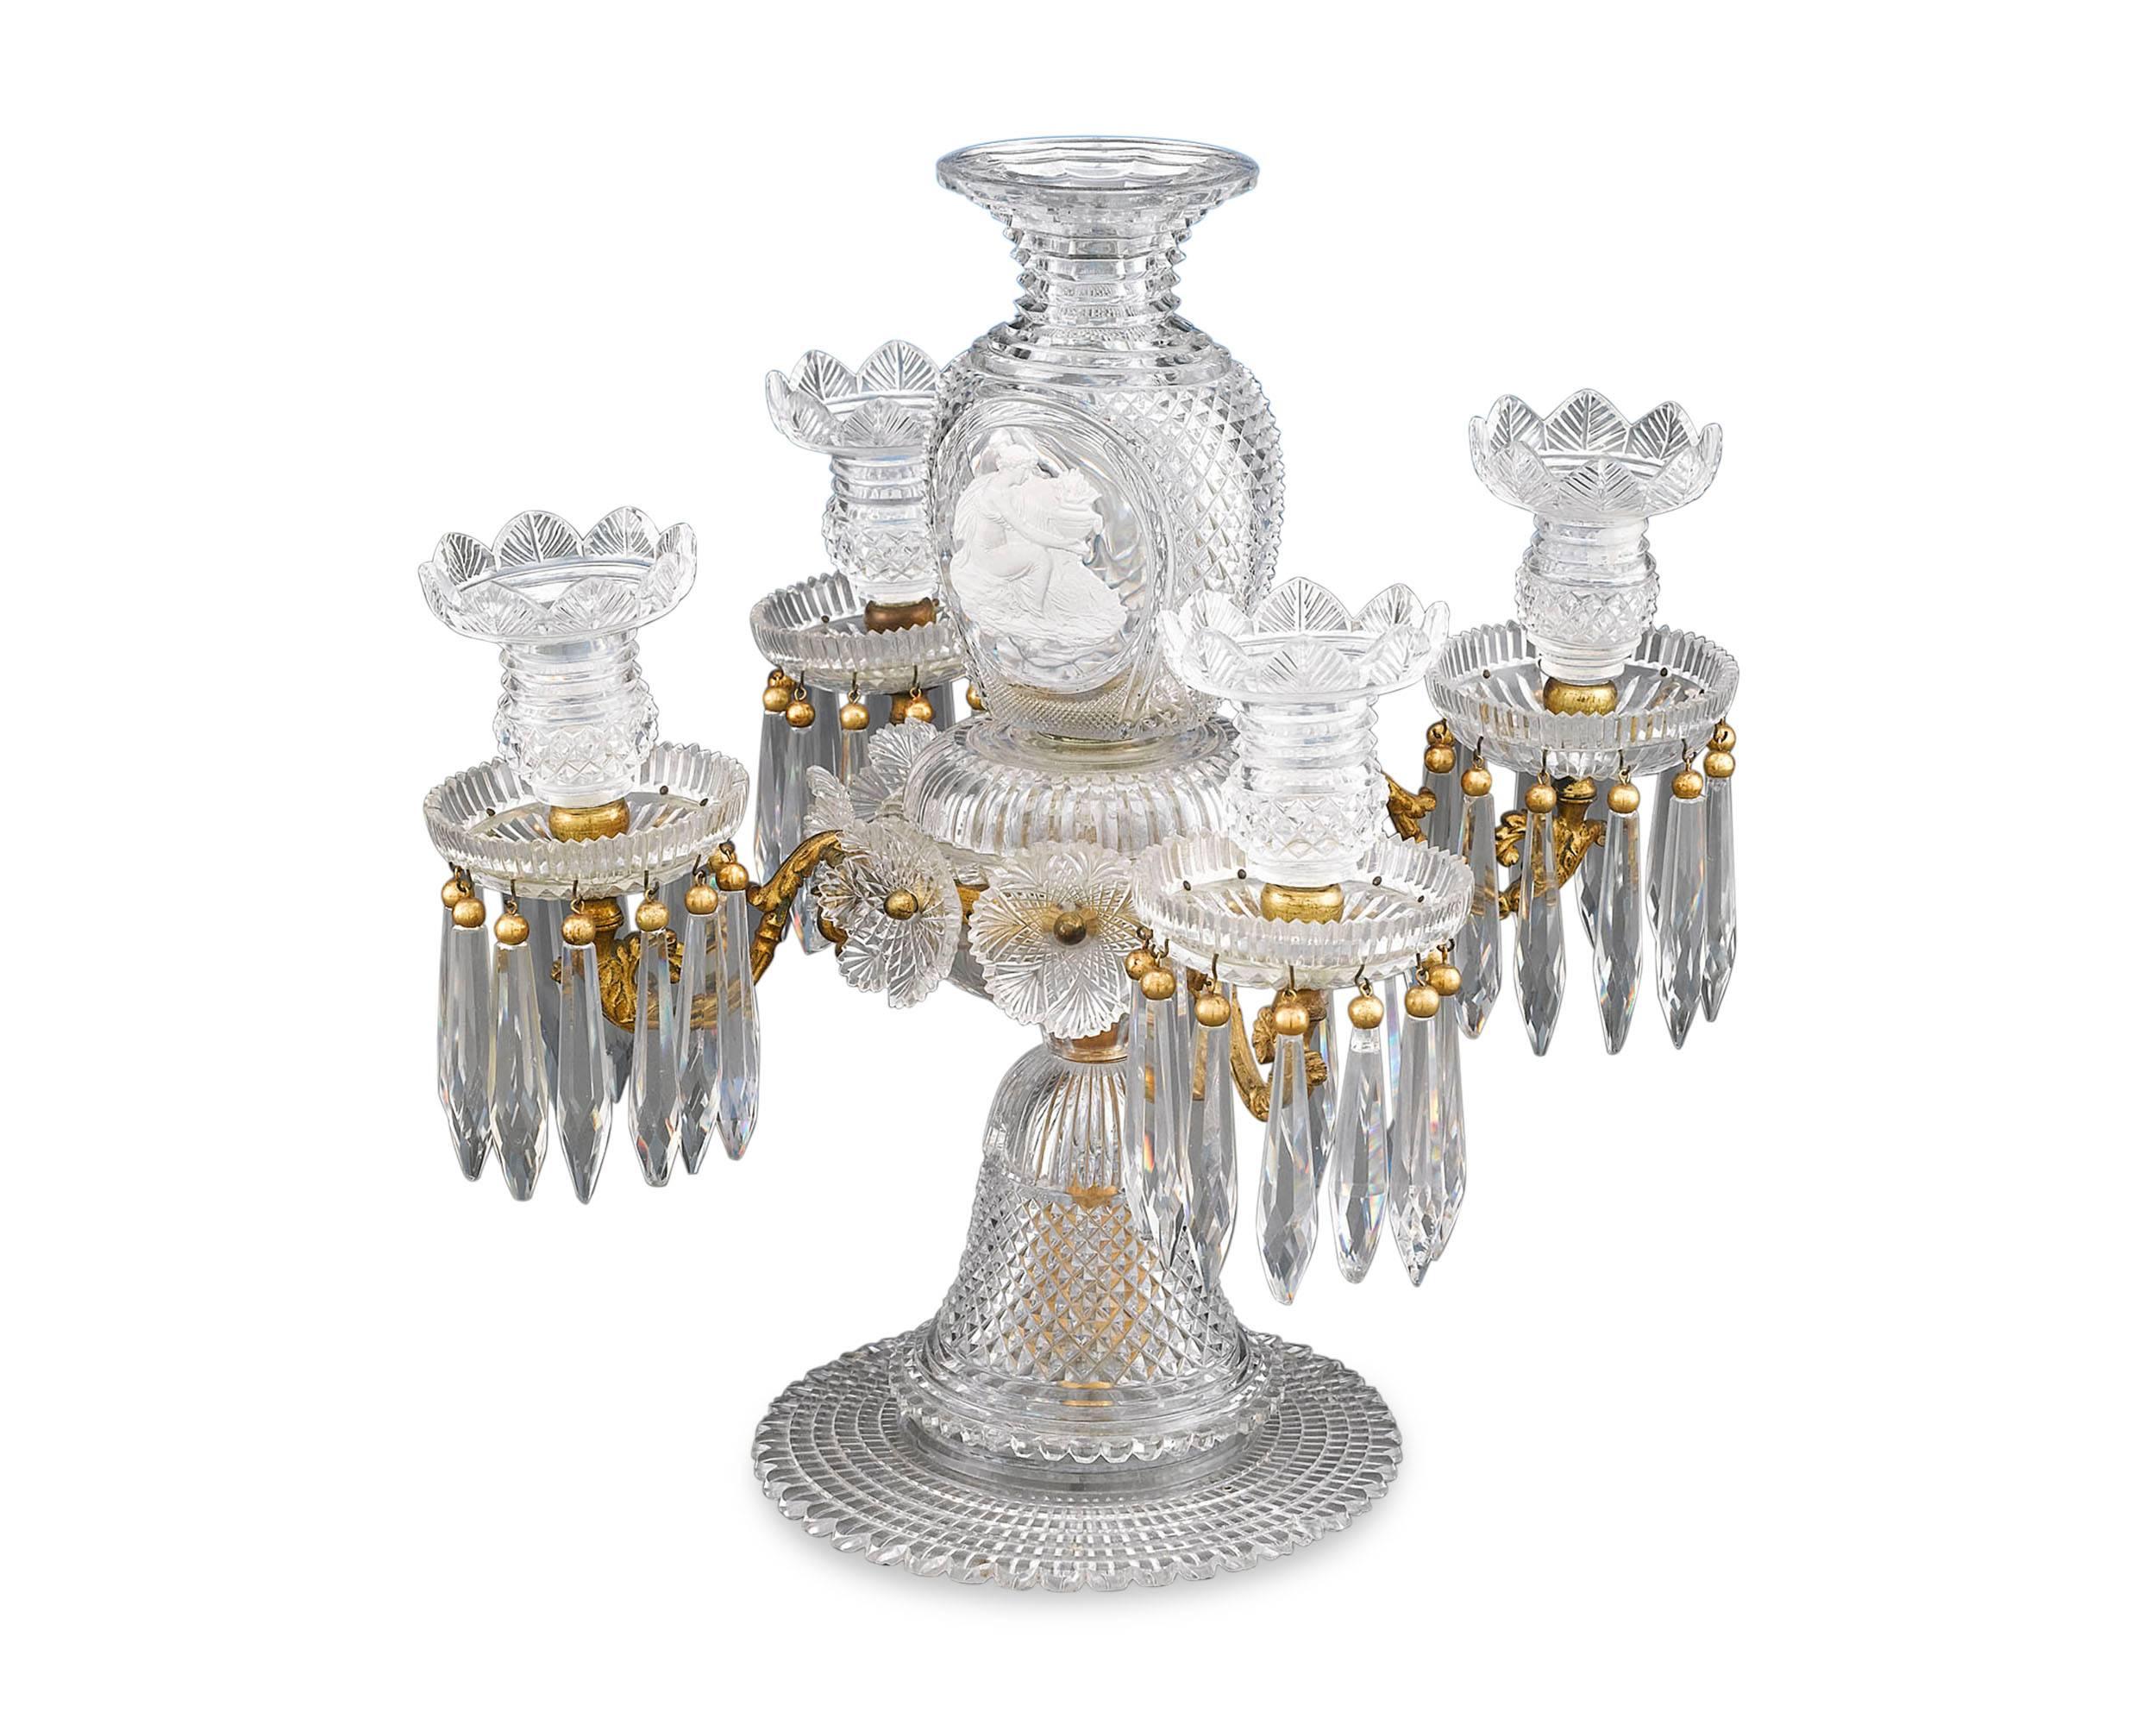 This exceptional and rare four-light cut-glass centerpiece by the renowned Apsley Pellatt is a work of tremendous skill and artistry. A symphony of delicate diamond-cut-glass, this light is topped with a flower vase center enclosing an intricate